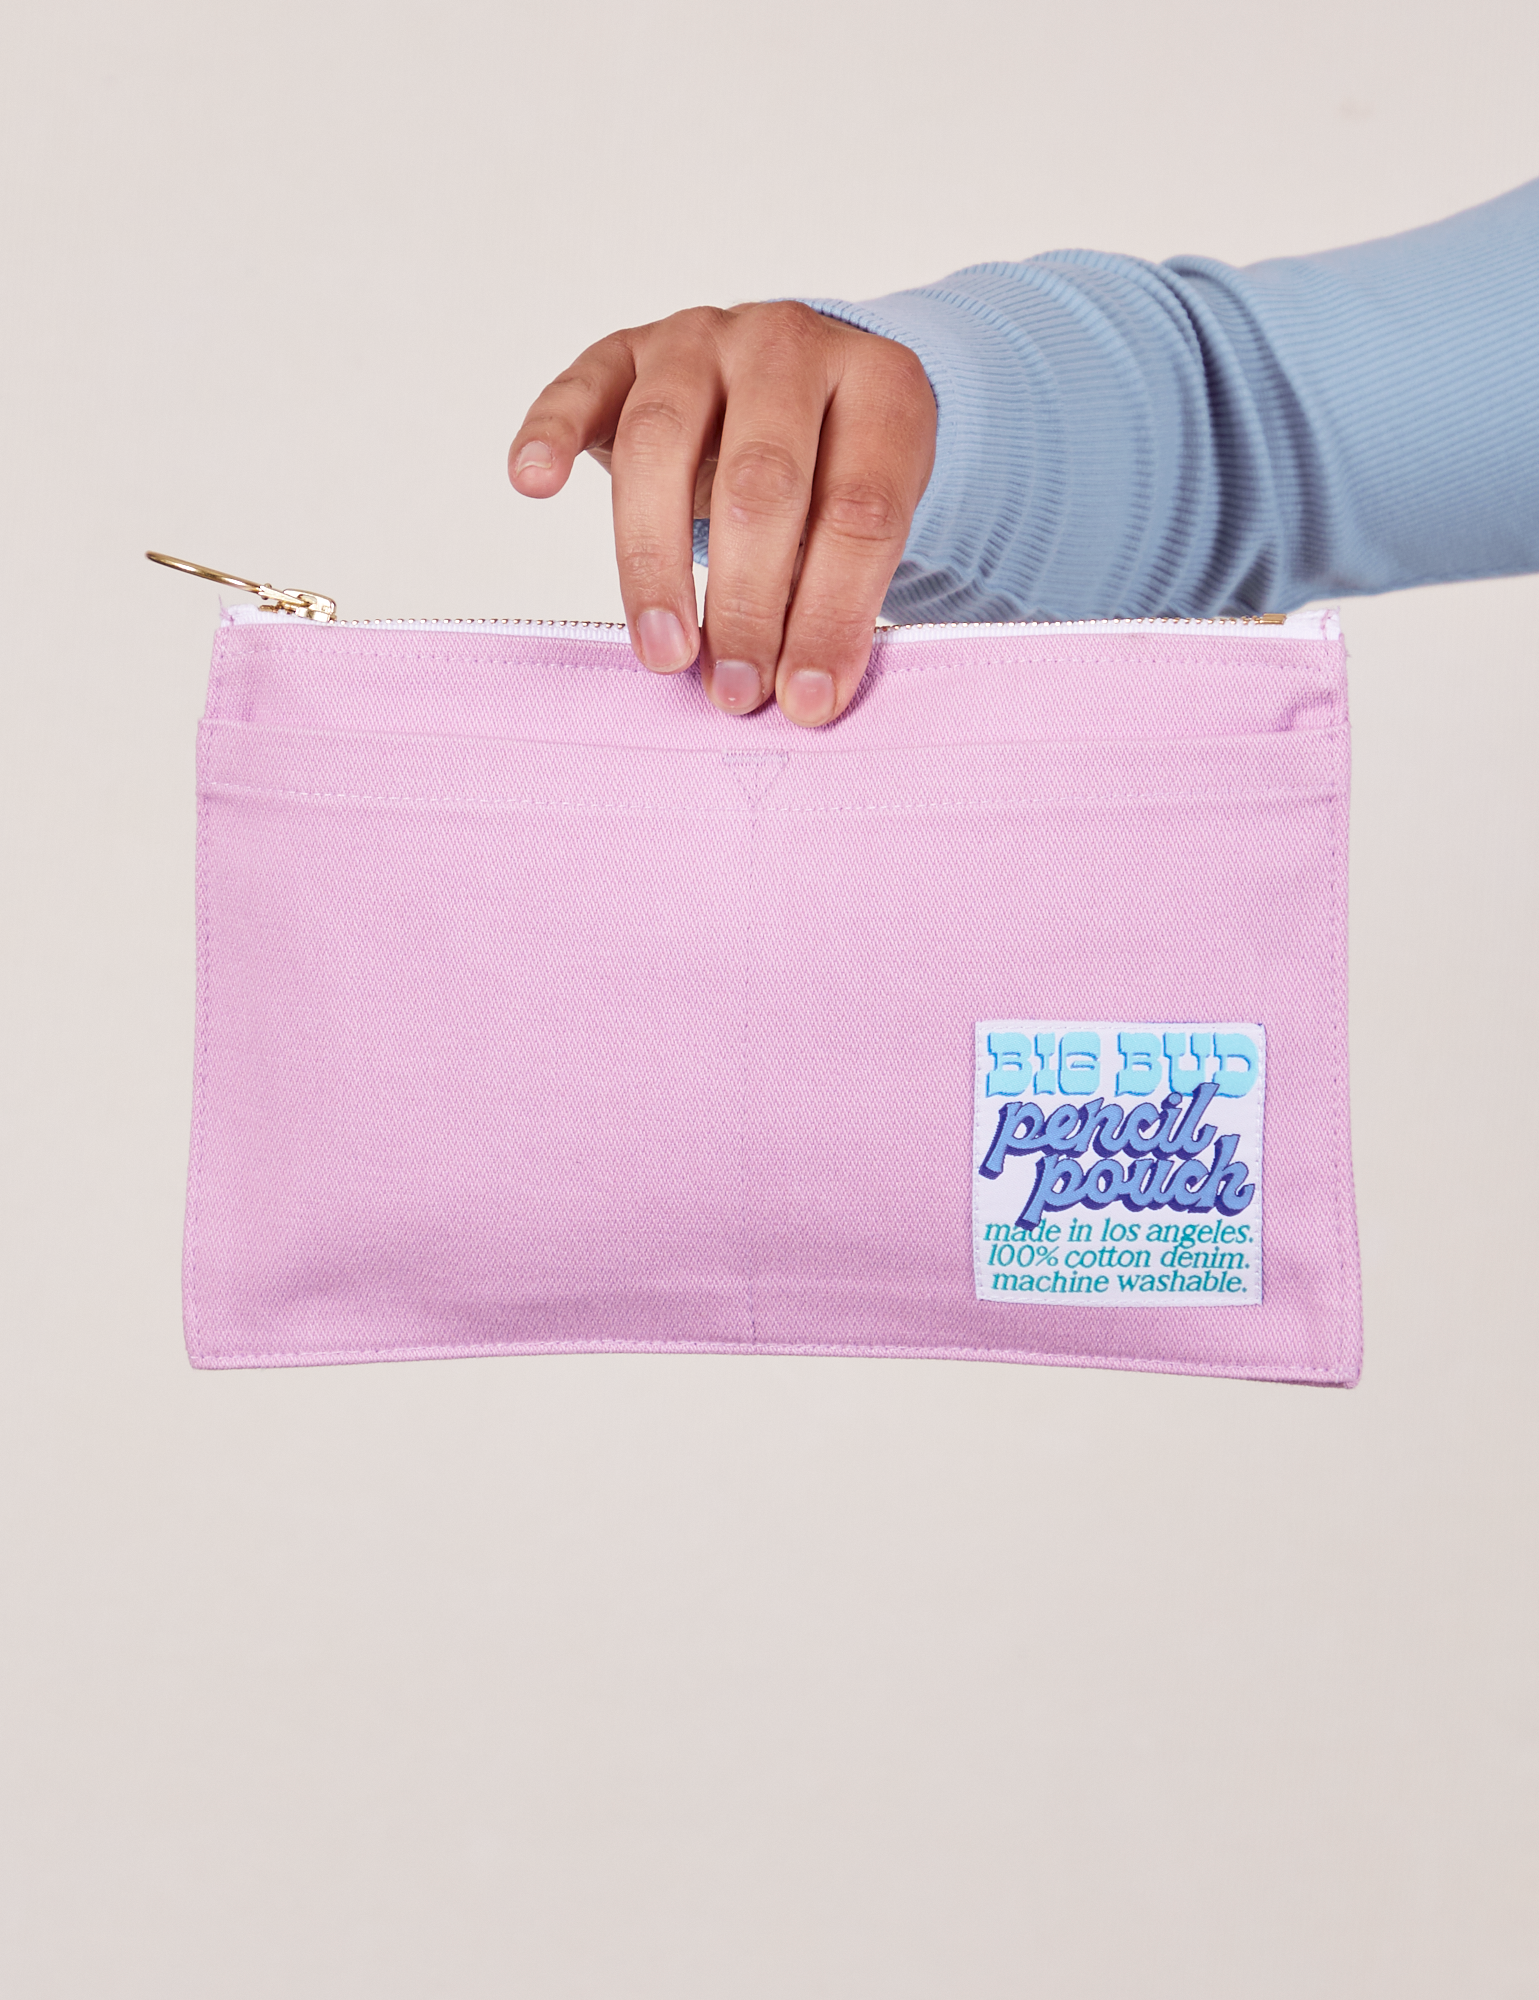 Pencil Pouch in Lilac Purple held by model